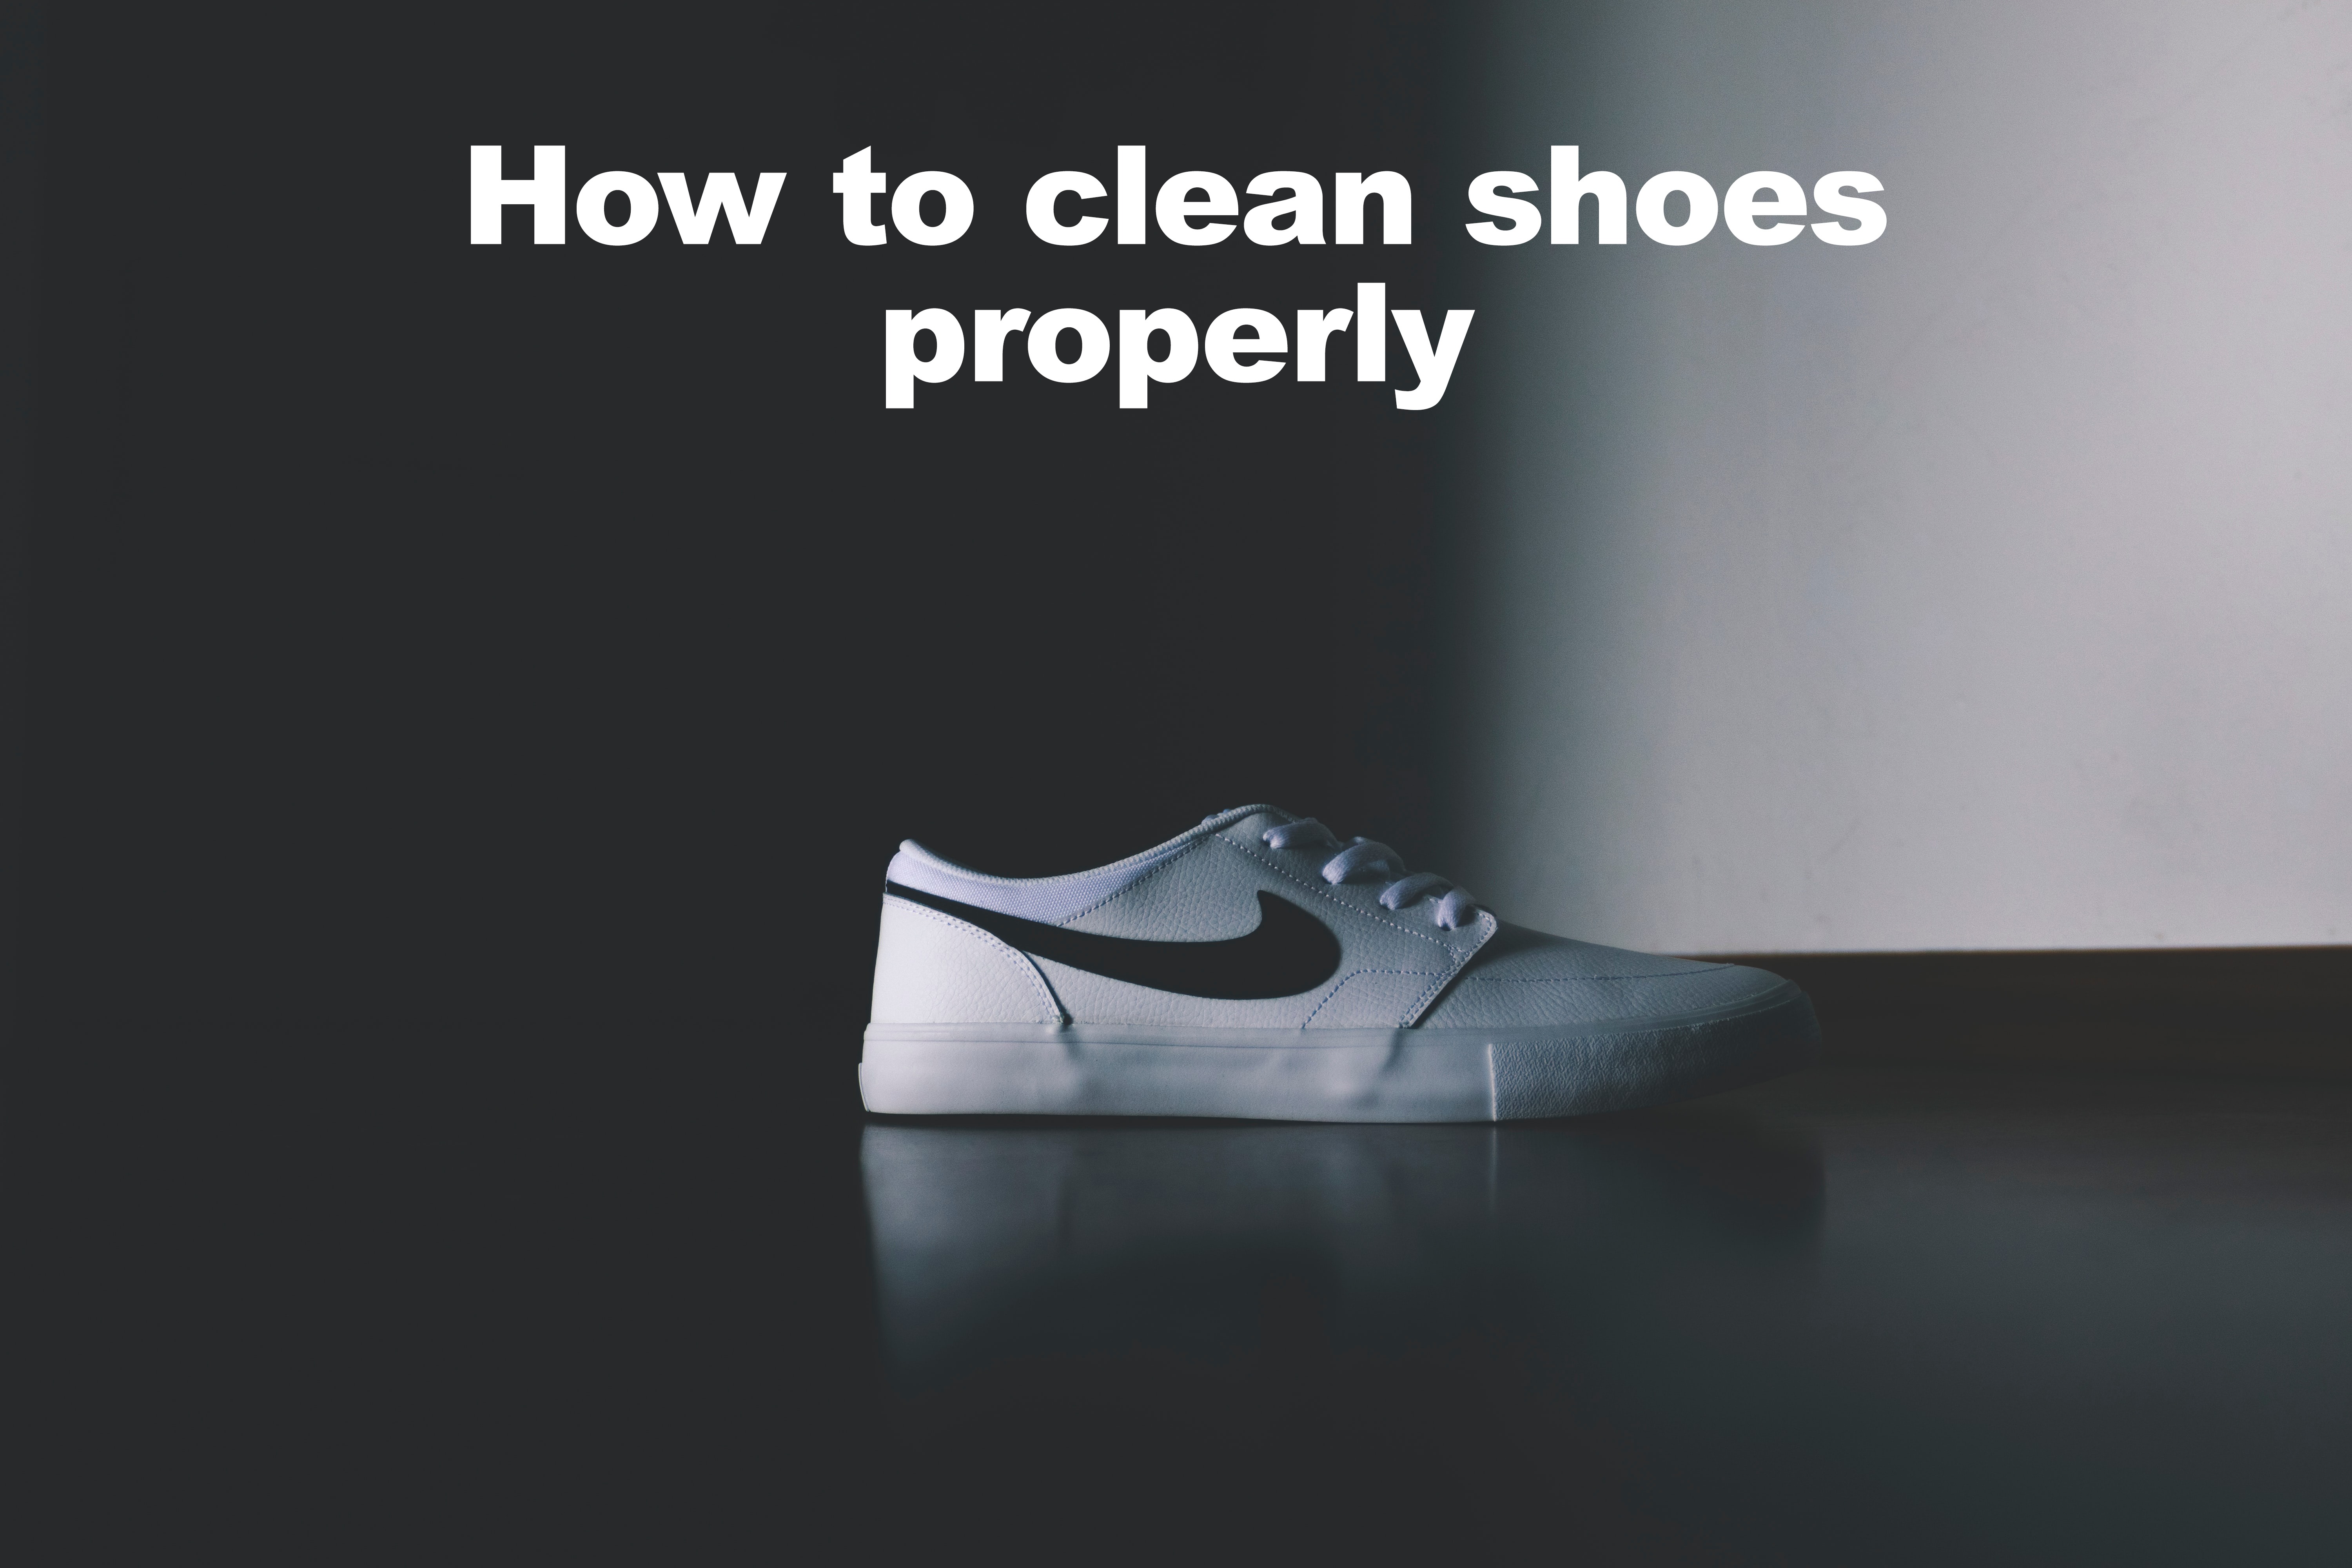 How to clean shoes properly